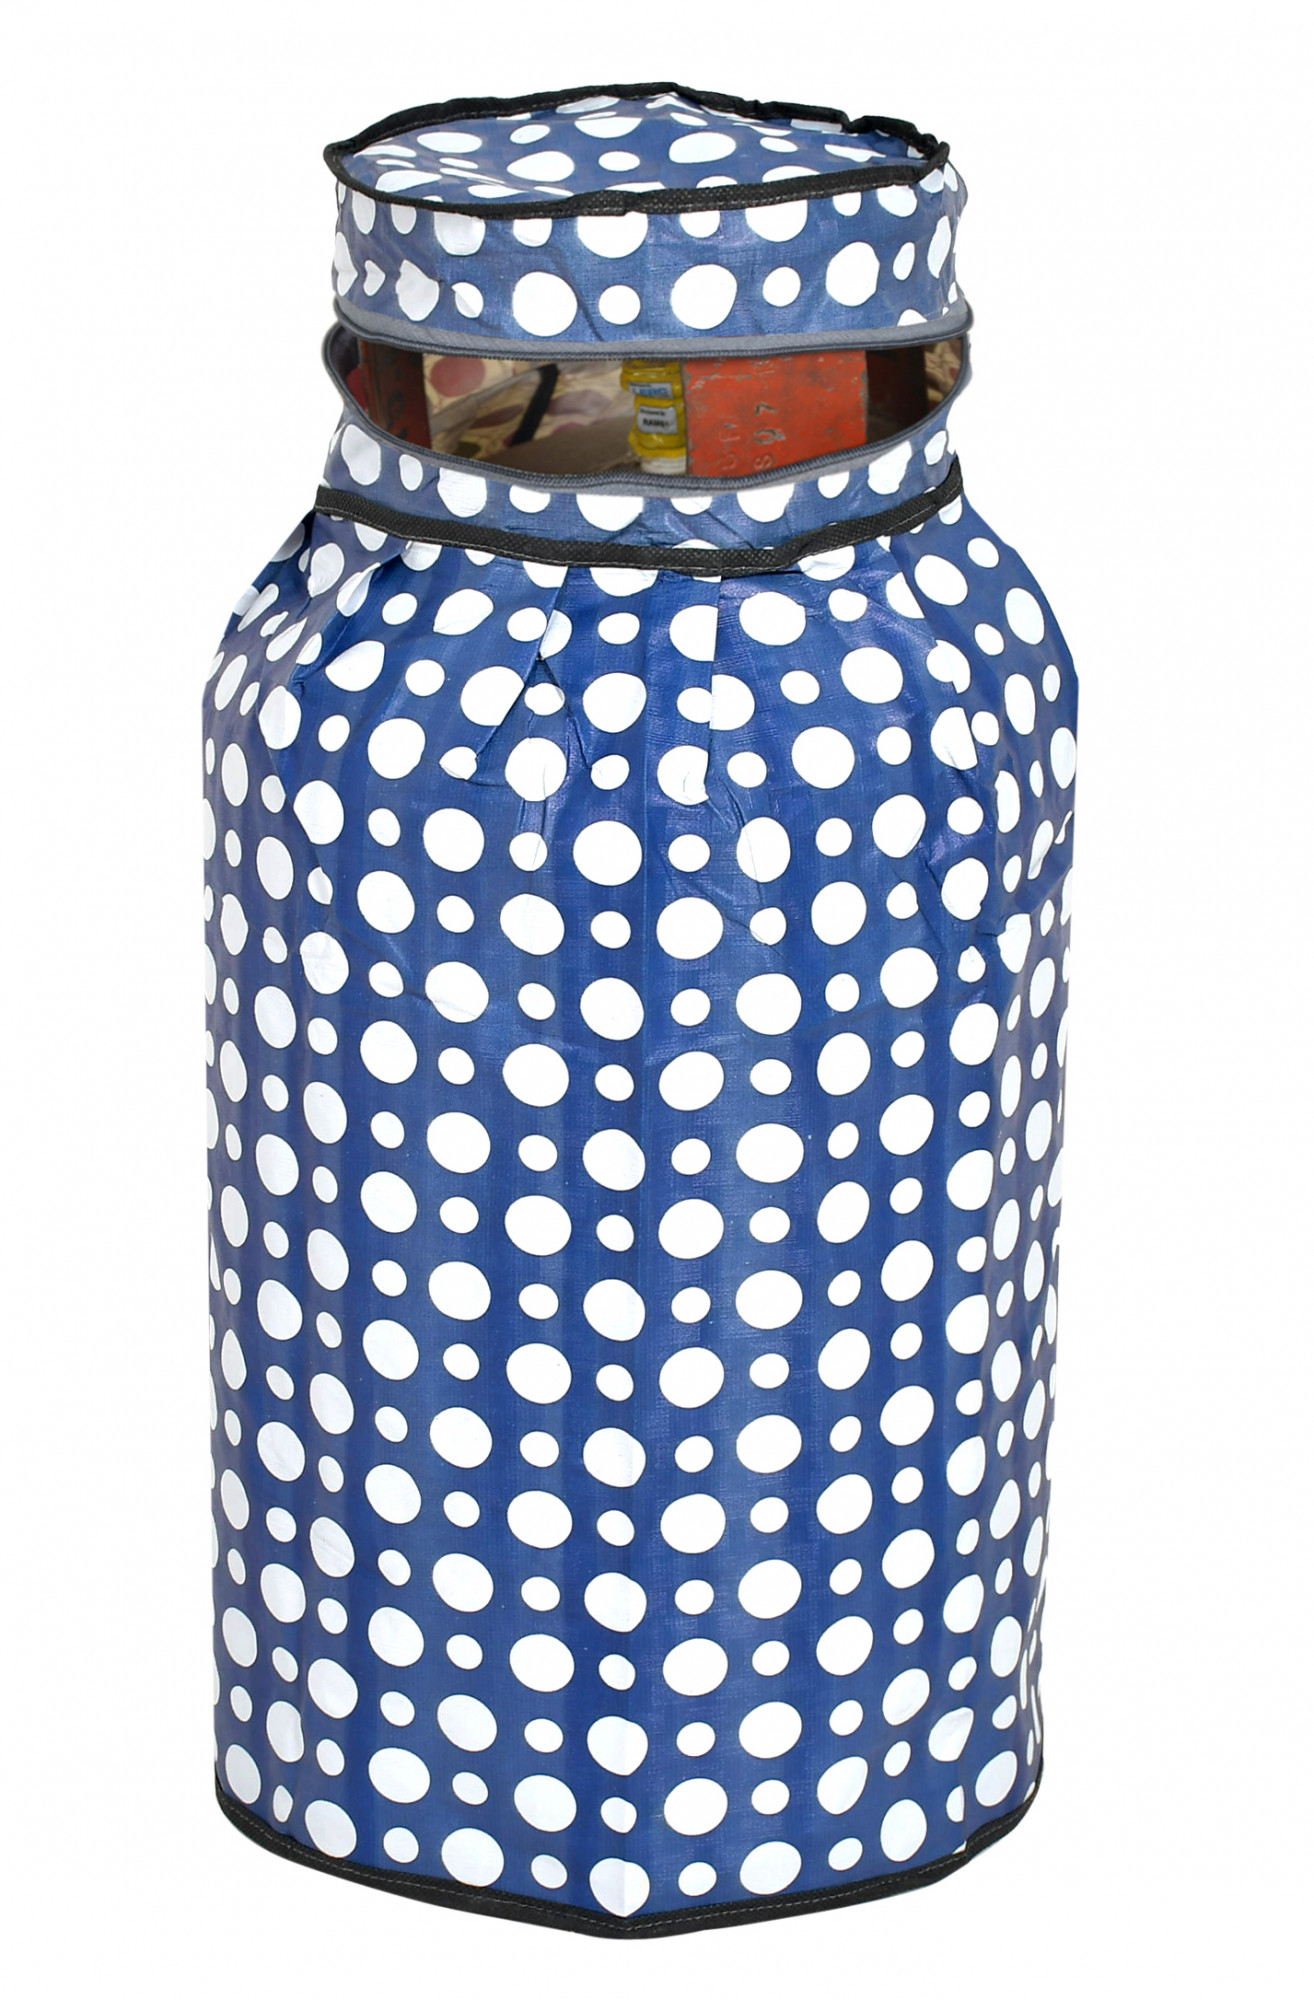 Kuber Industries Dot Printed PVC Lpg Gas Cylinder Cover- Pack of 2 (Blue & White)-HS43KUBMART25623, Standard